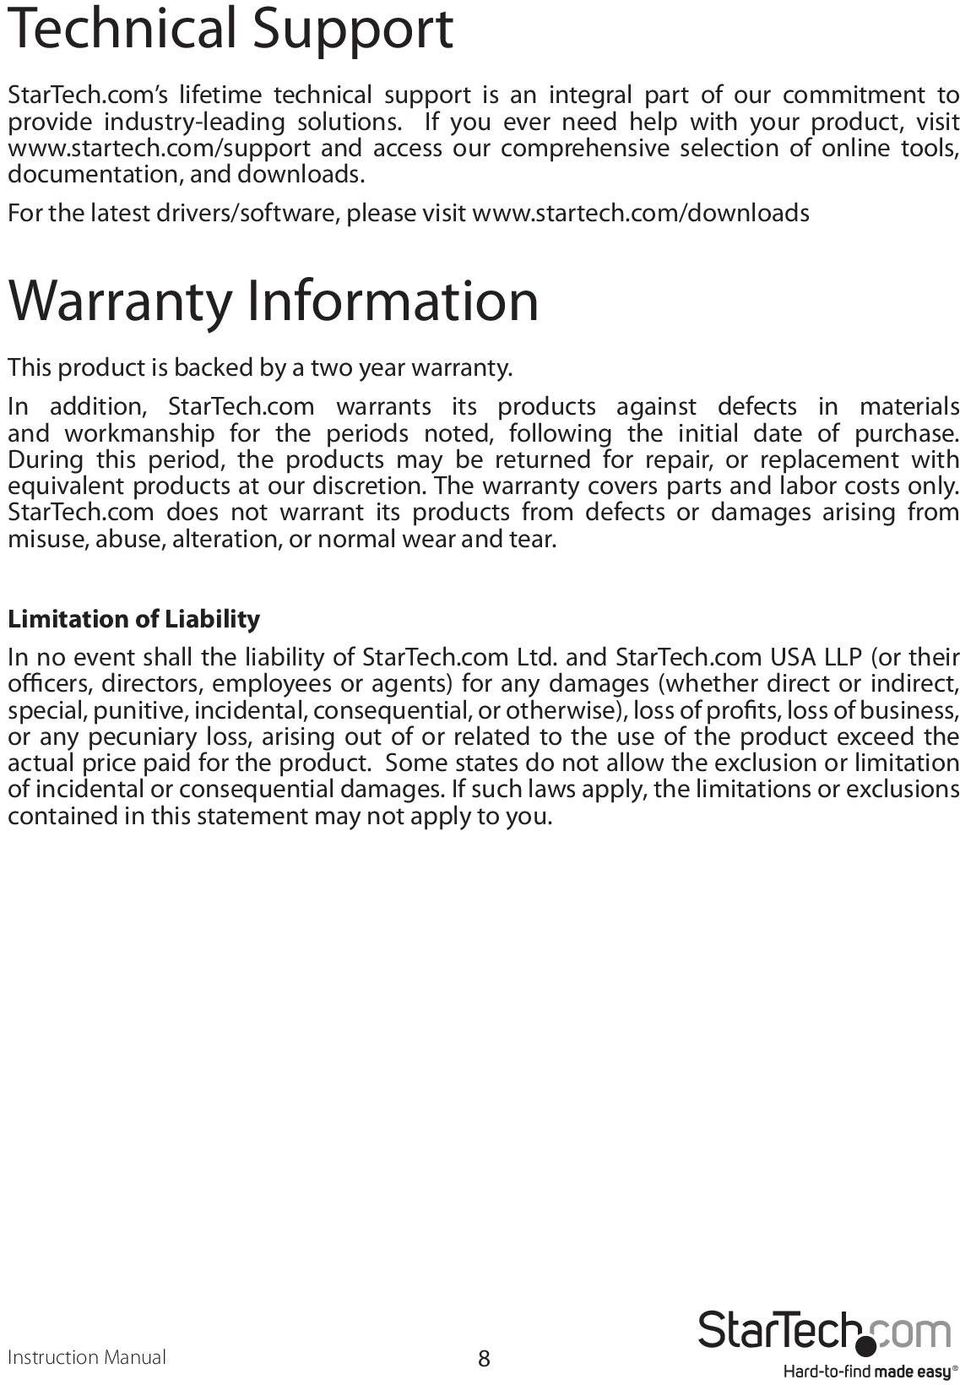 com/downloads Warranty Information This product is backed by a two year warranty. In addition, StarTech.